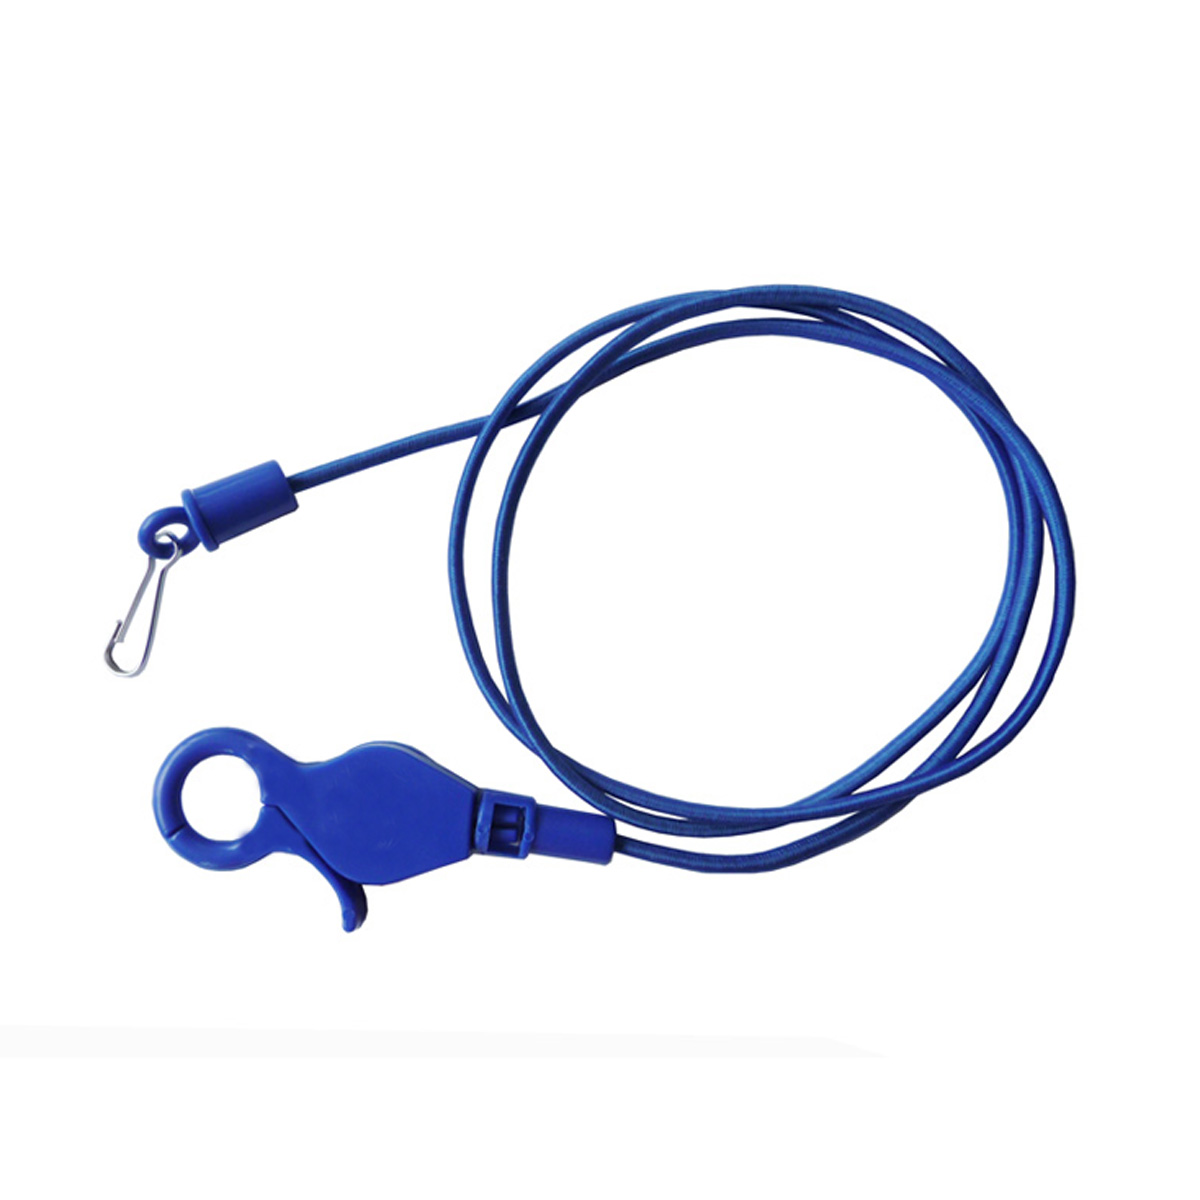 GL-AAD1041 20in Casino Slot Players Card Bungee Cord Key Chain 